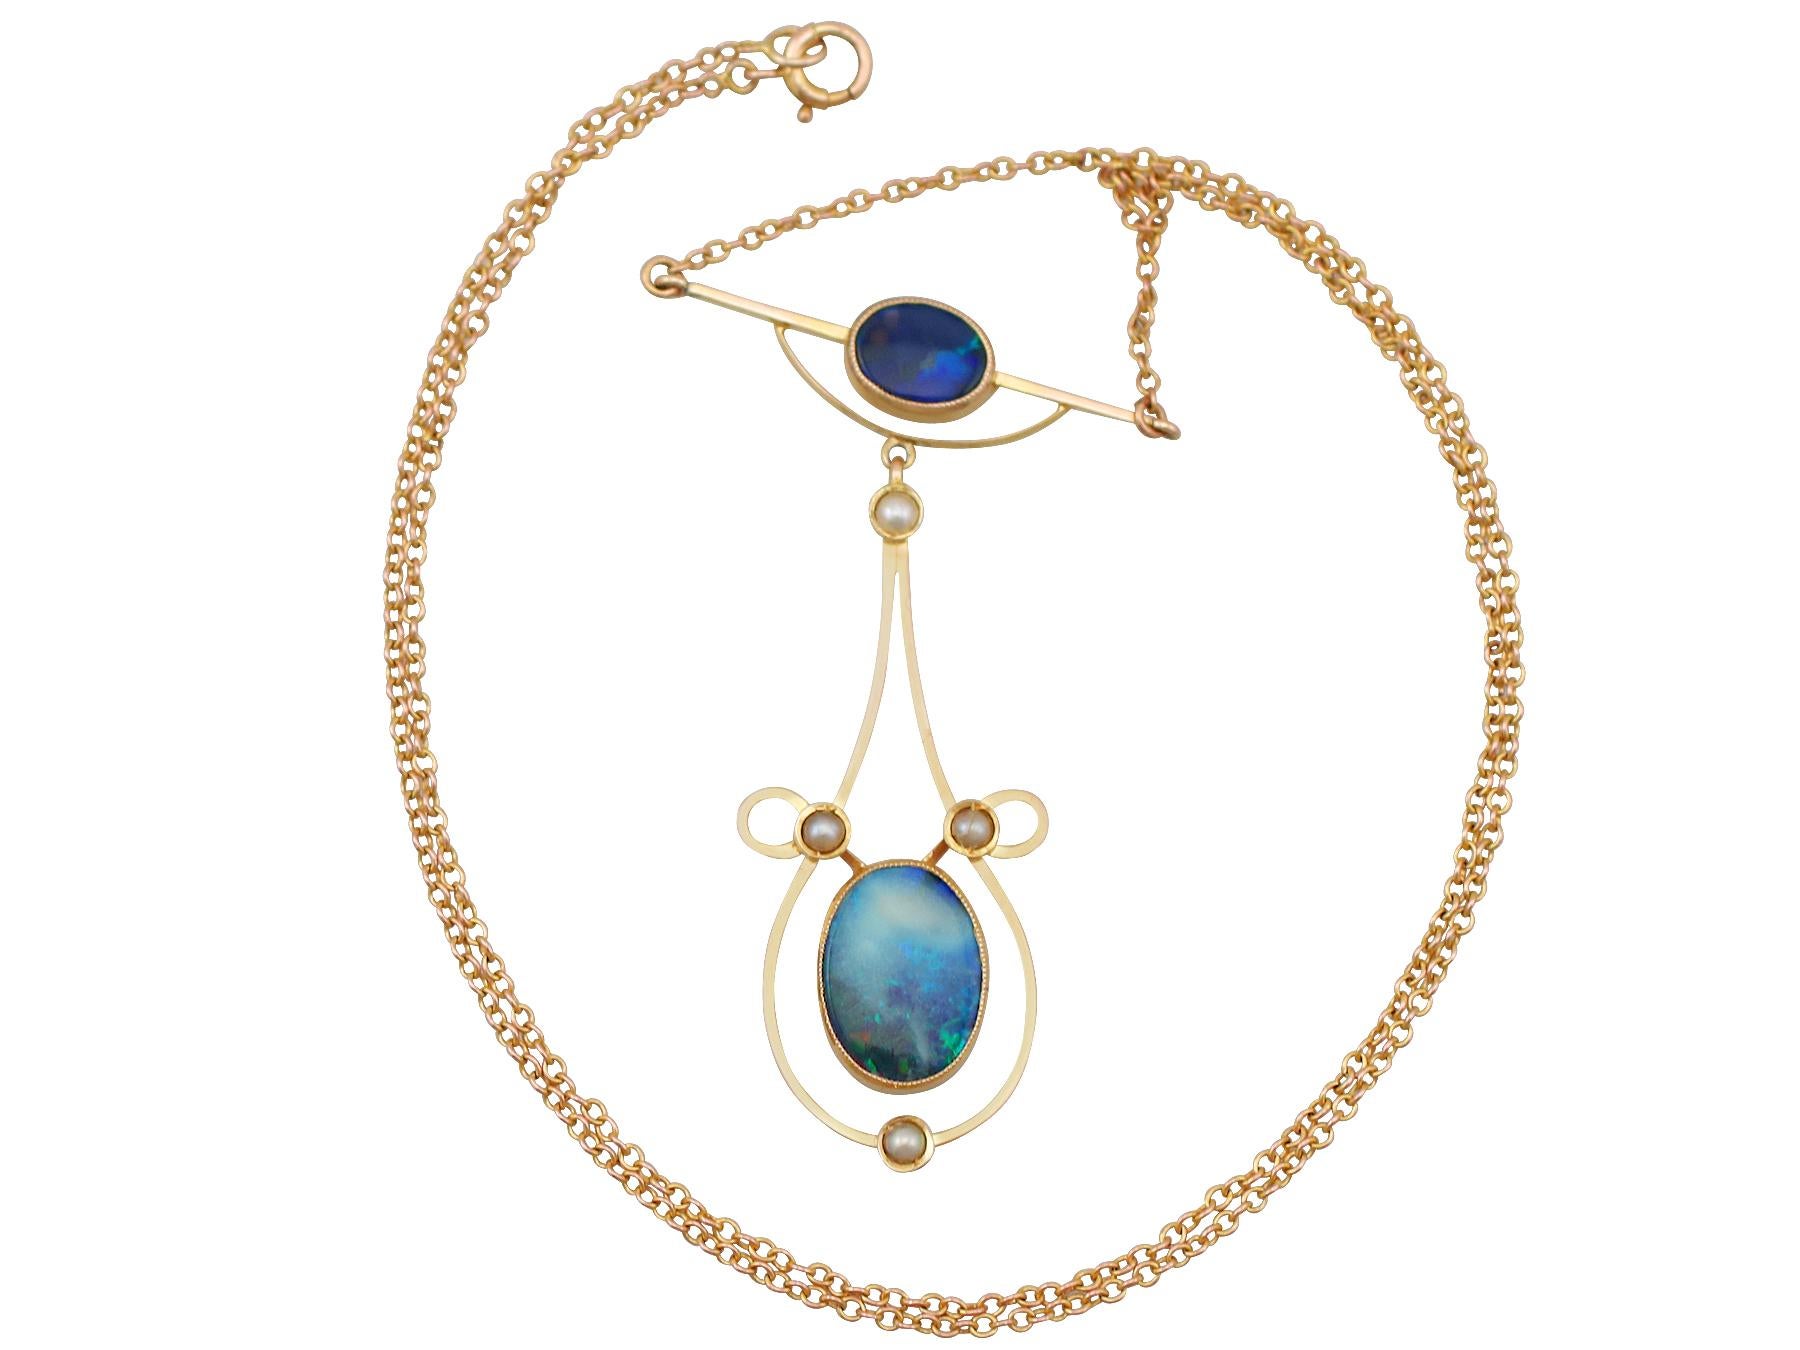 A fine and impressive 2.07 carat black opal and seed pearl, 9 karat yellow gold and 10 karat yellow gold necklace; part of our diverse antique jewellery and estate jewelry collections

This fine and impressive pearl and opal necklace has been